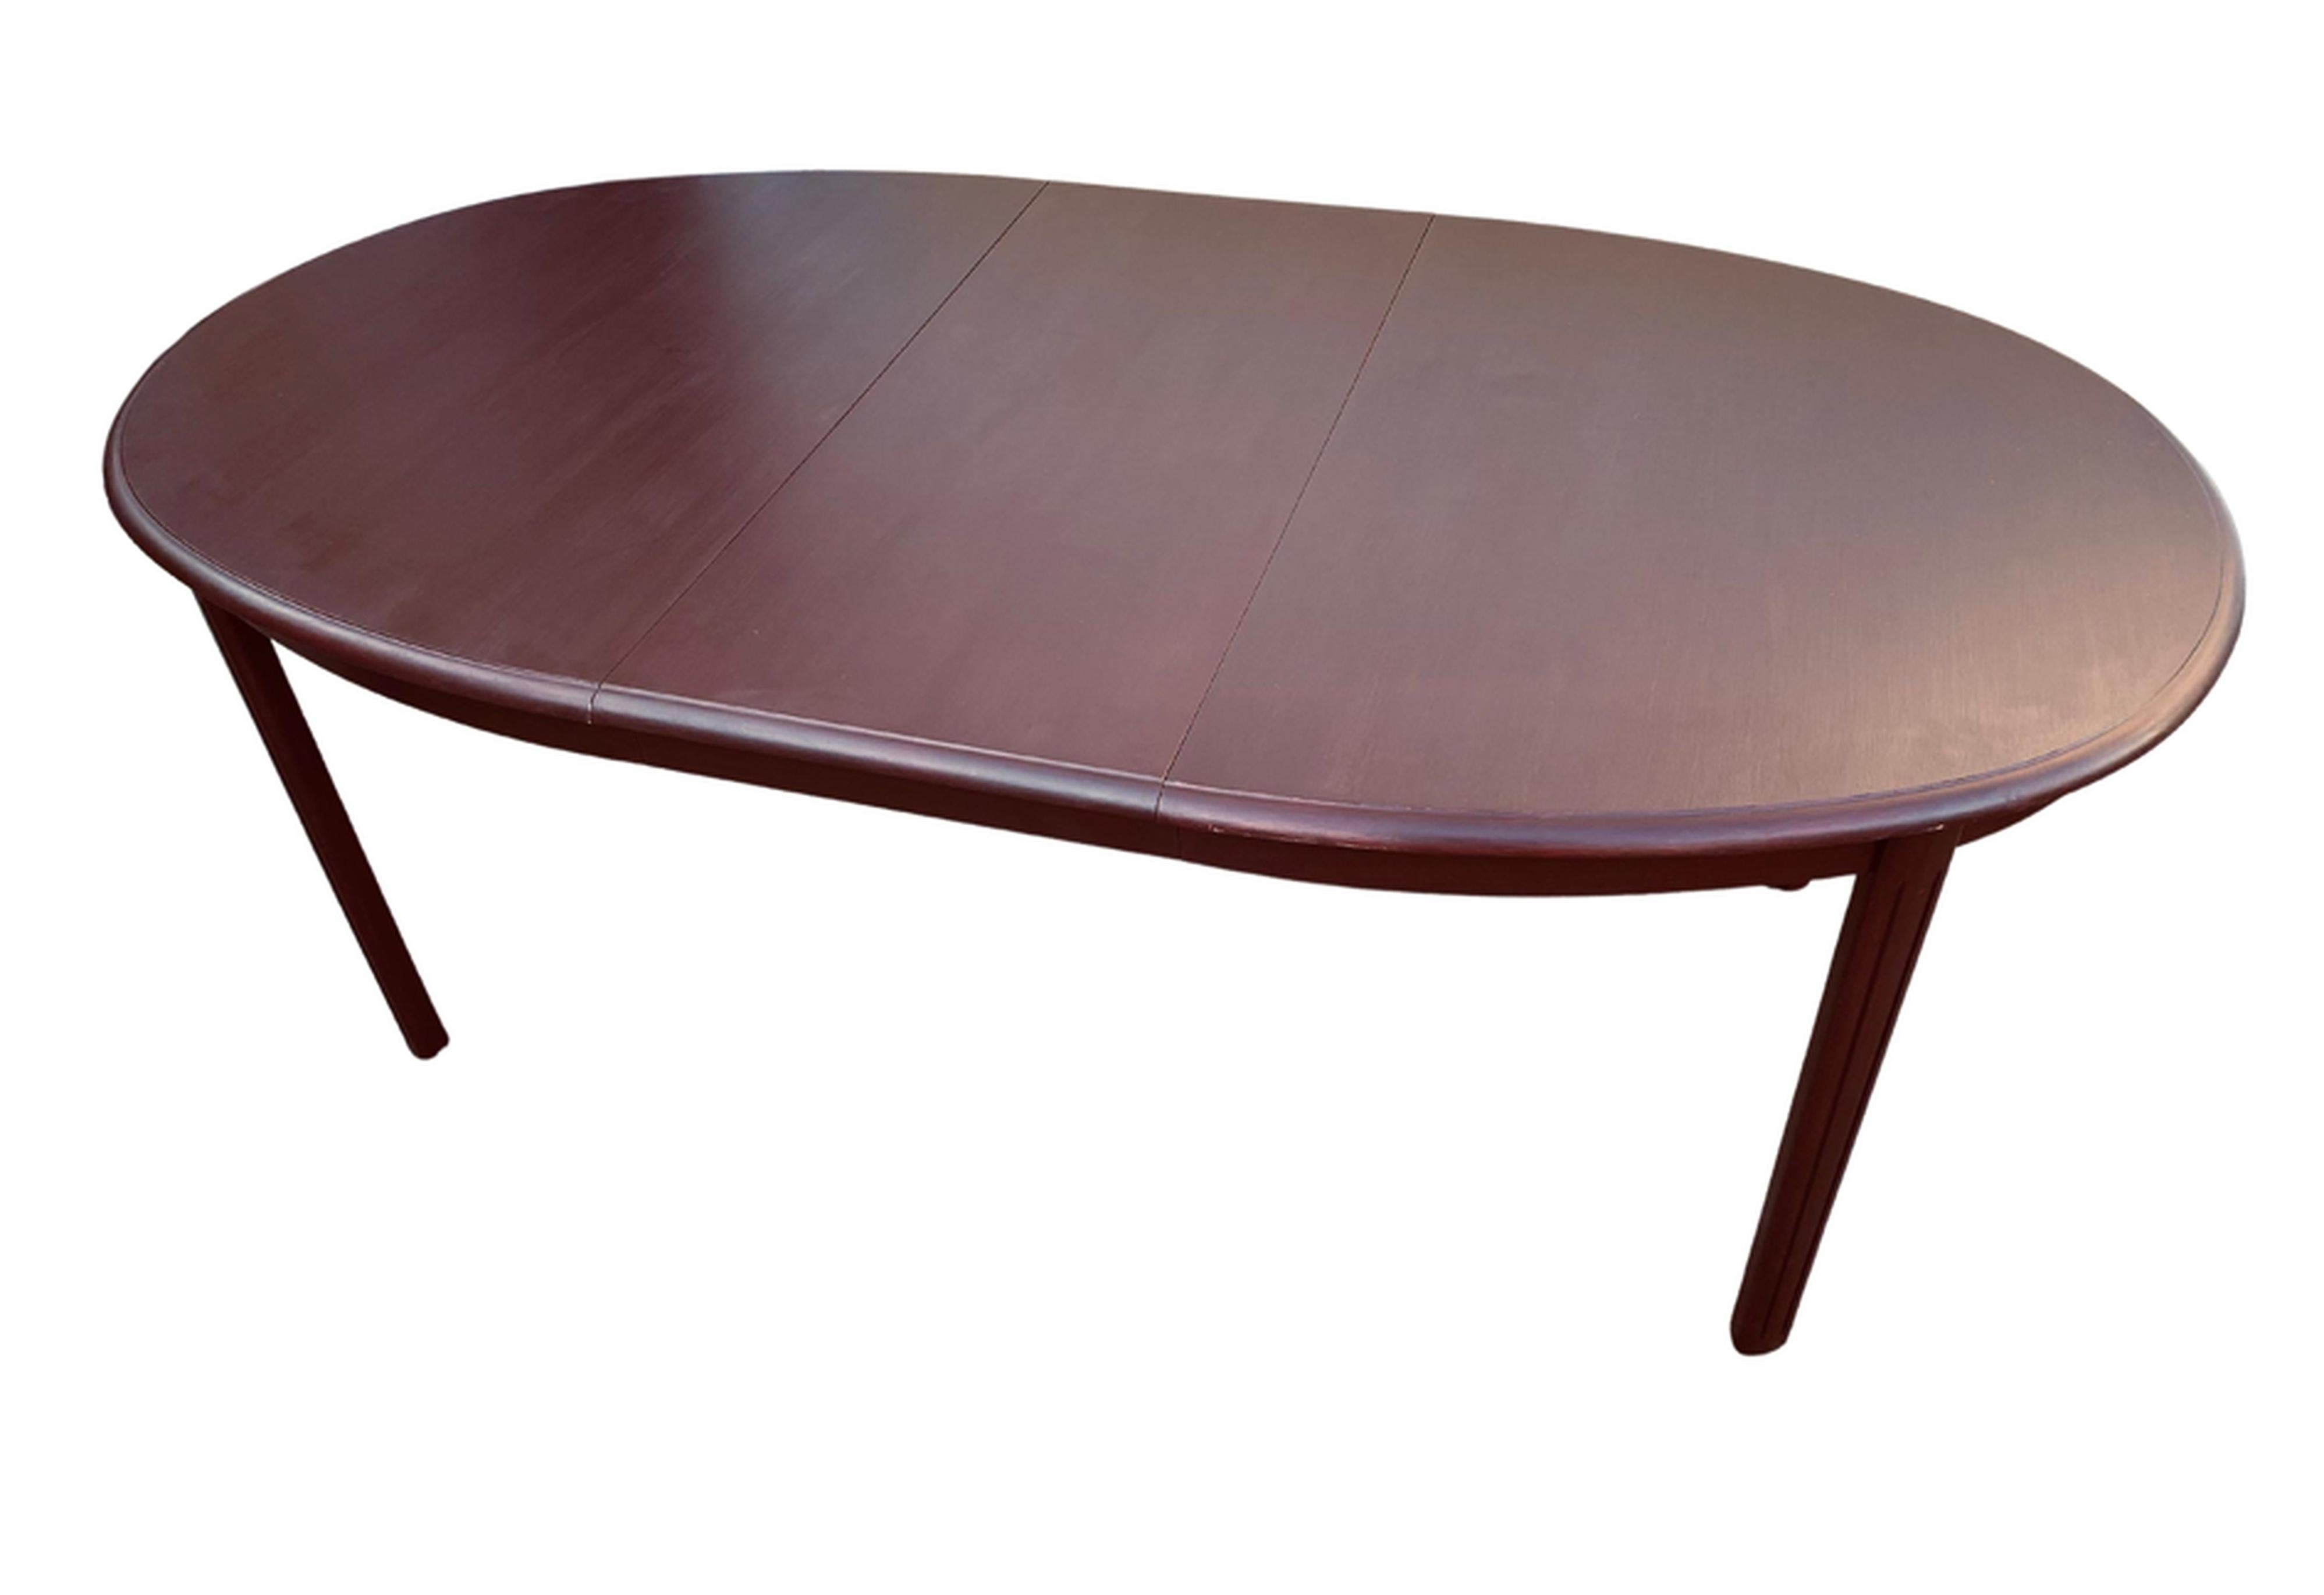 20th Century Danish Midcentury Dining Table in Mahogany with Two Extra Leafs For Sale